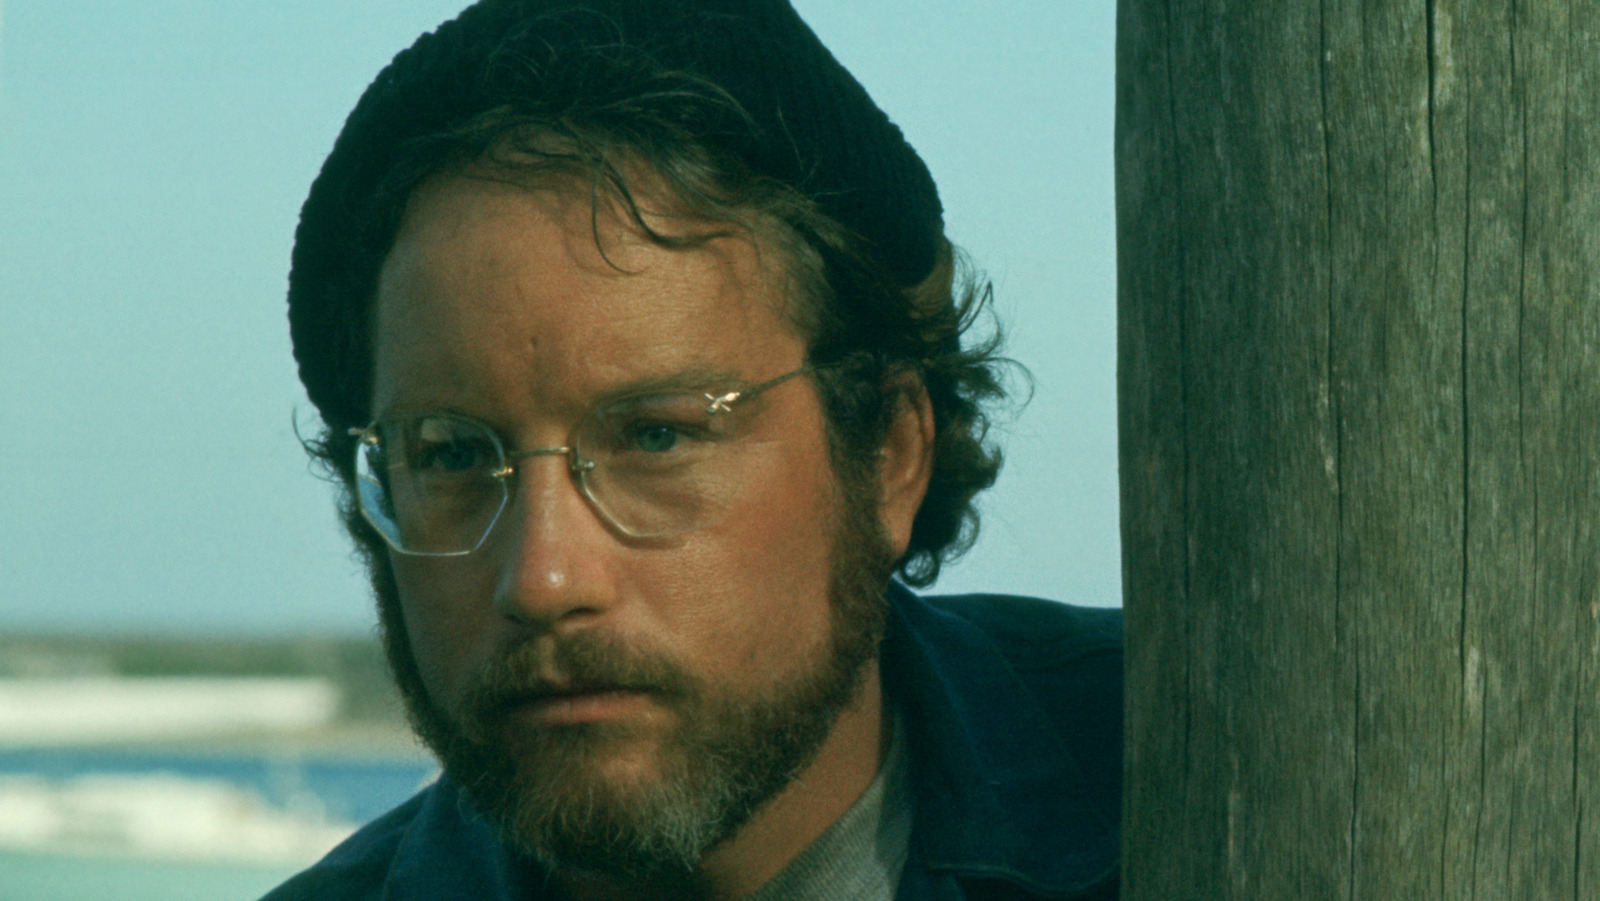 Richard Dreyfuss' 7 Best And 7 Worst Movies Ranked